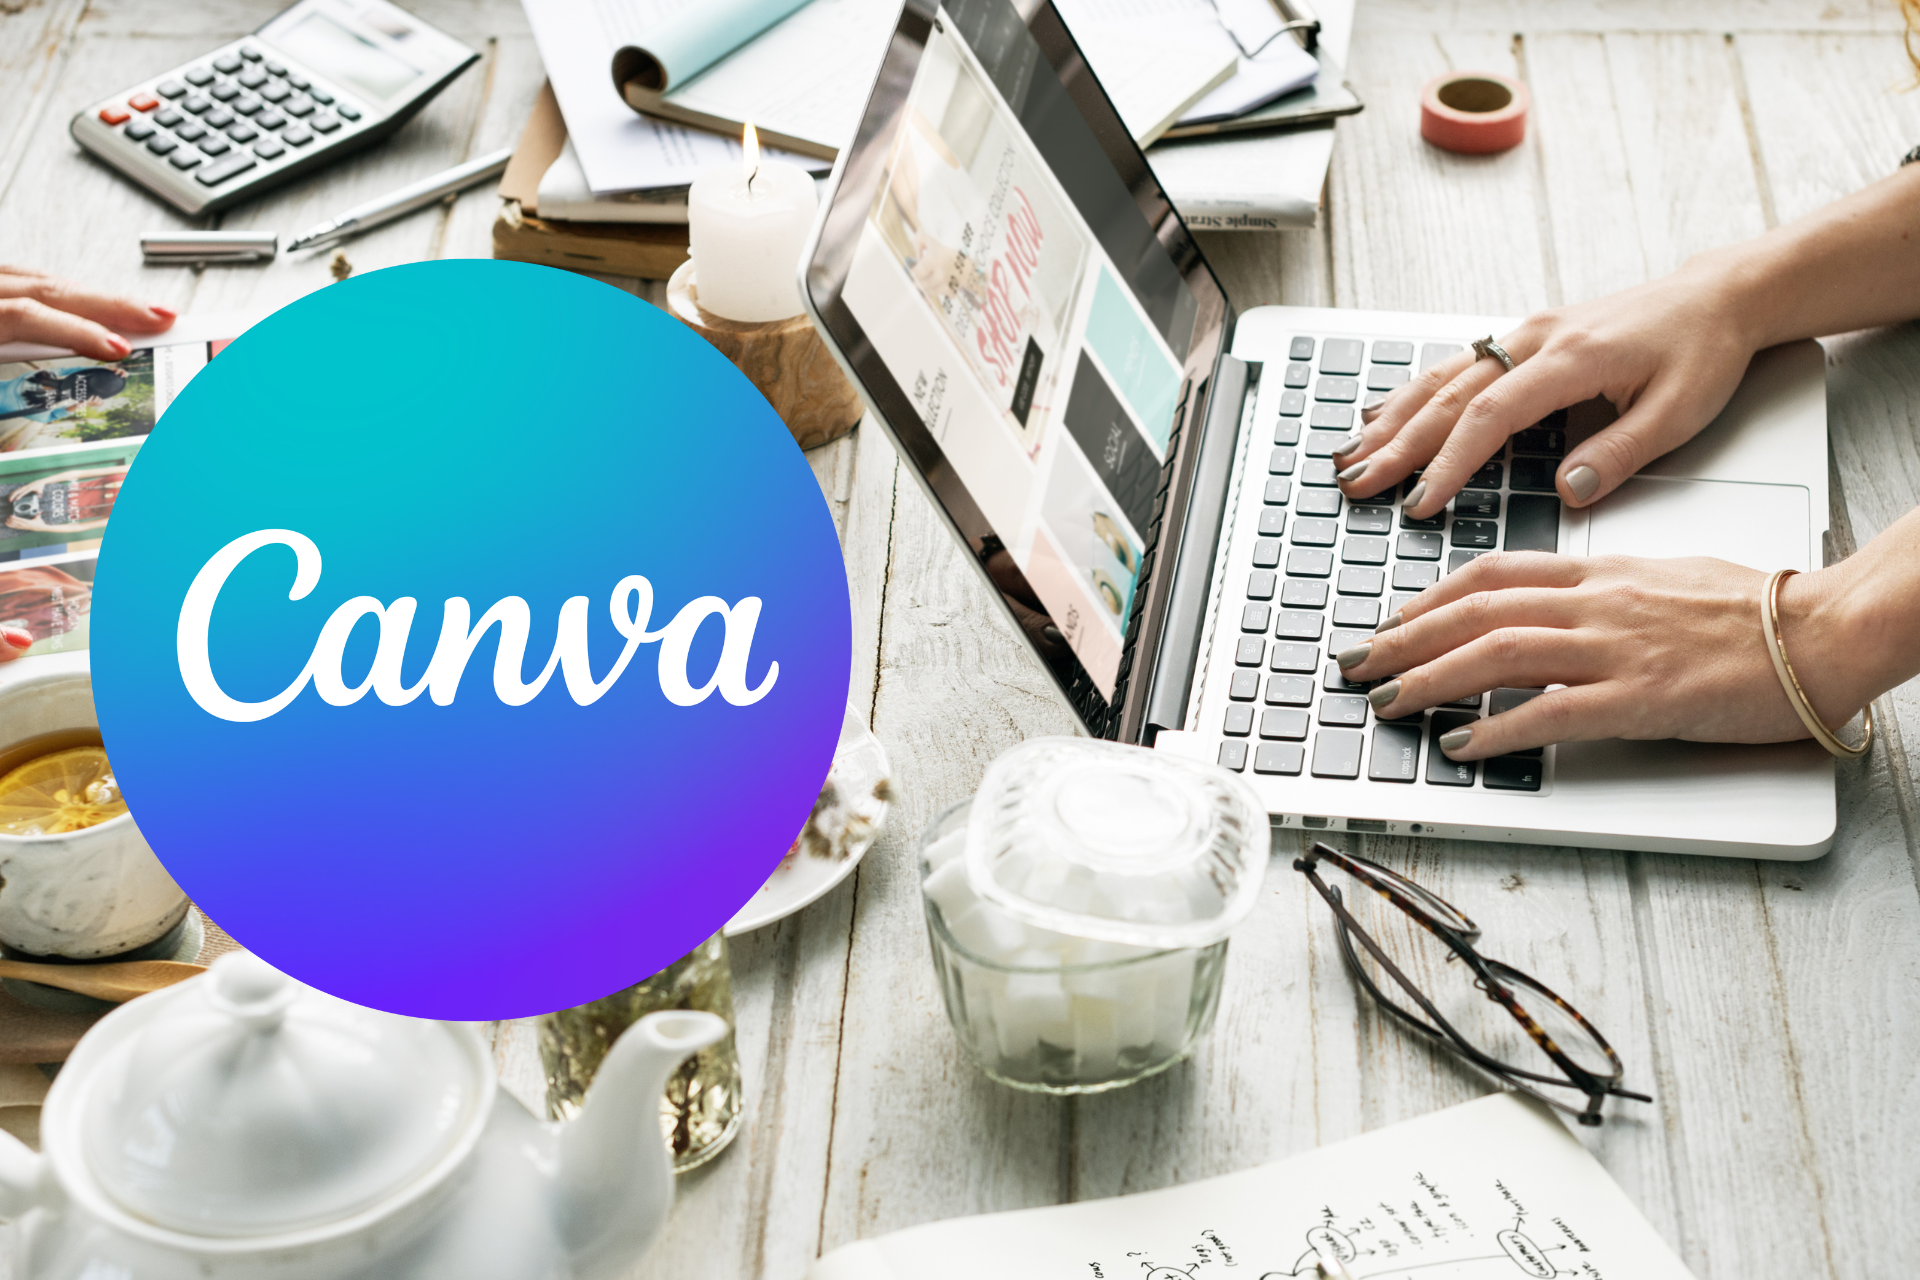 Getting started with Canva